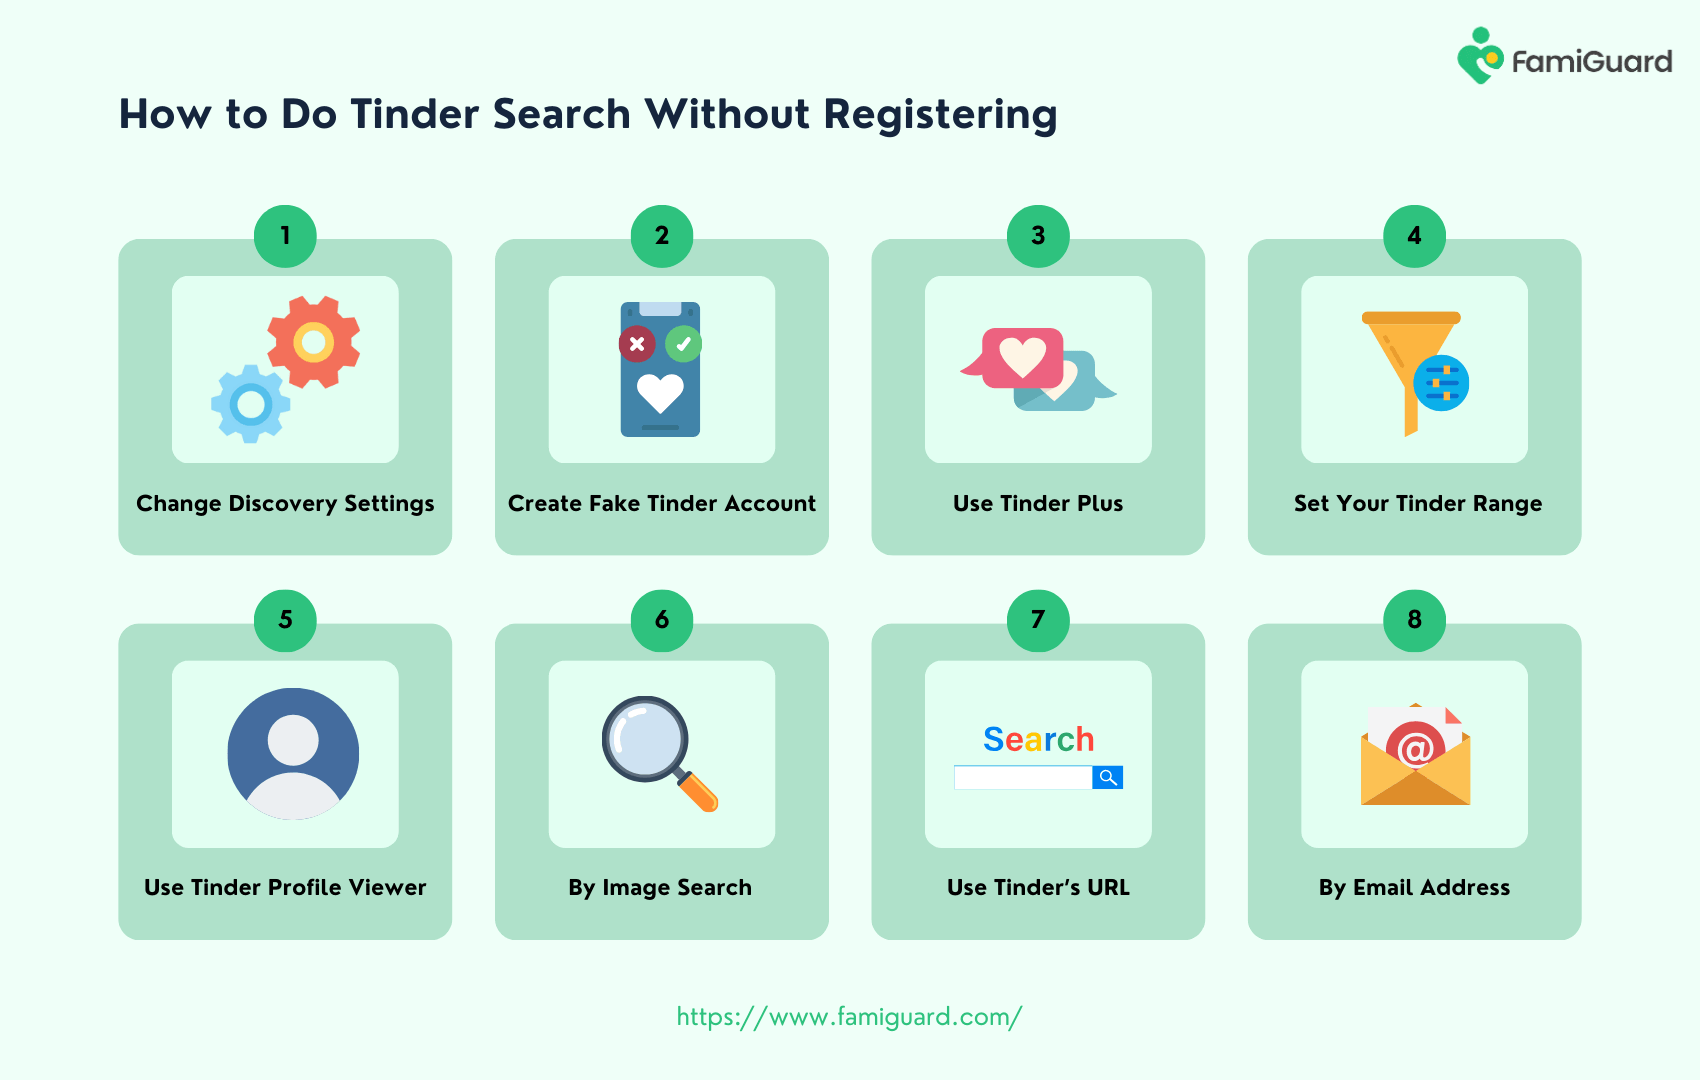 How to Tinder Search without Registration